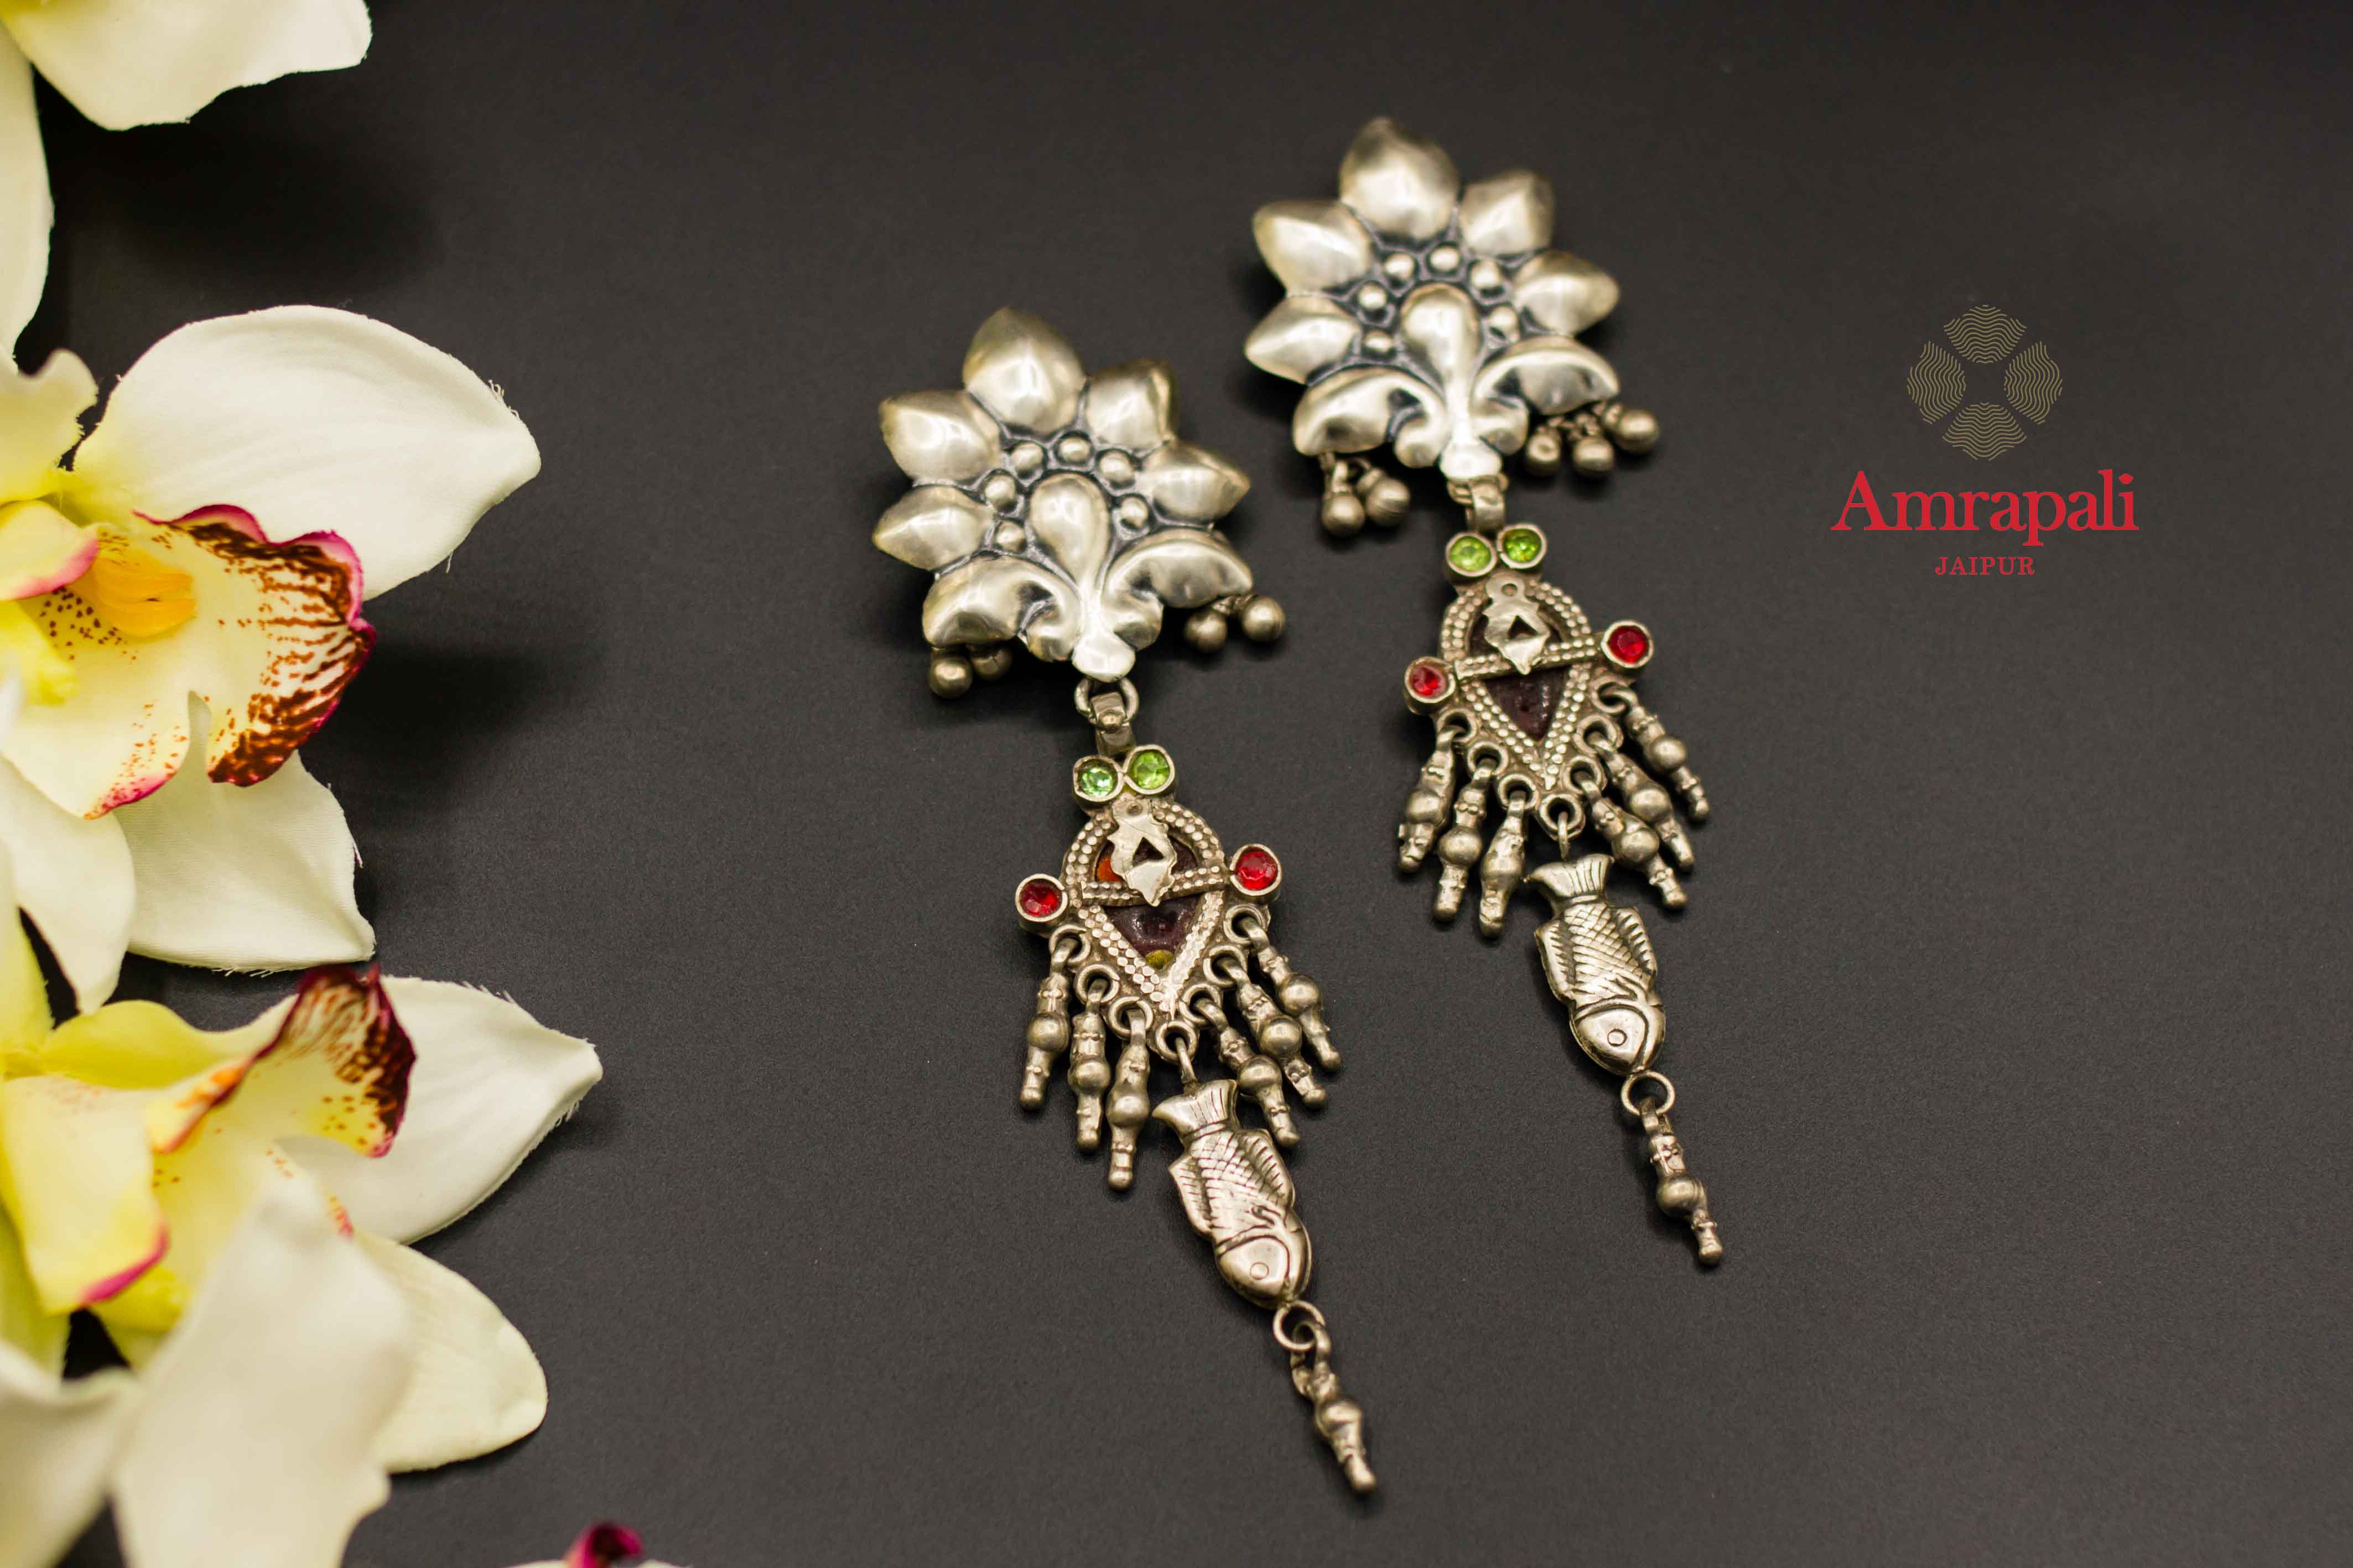 Buy Amrapali flower top silver earrings online in USA with colored stones. Raise your ethnic style quotient on special occasions with exquisite Indian jewelry from Pure Elegance Indian clothing store in USA. Enhance your Indian look with silver gold plated jewelry, necklaces, silver jewelry available online.-flatlay